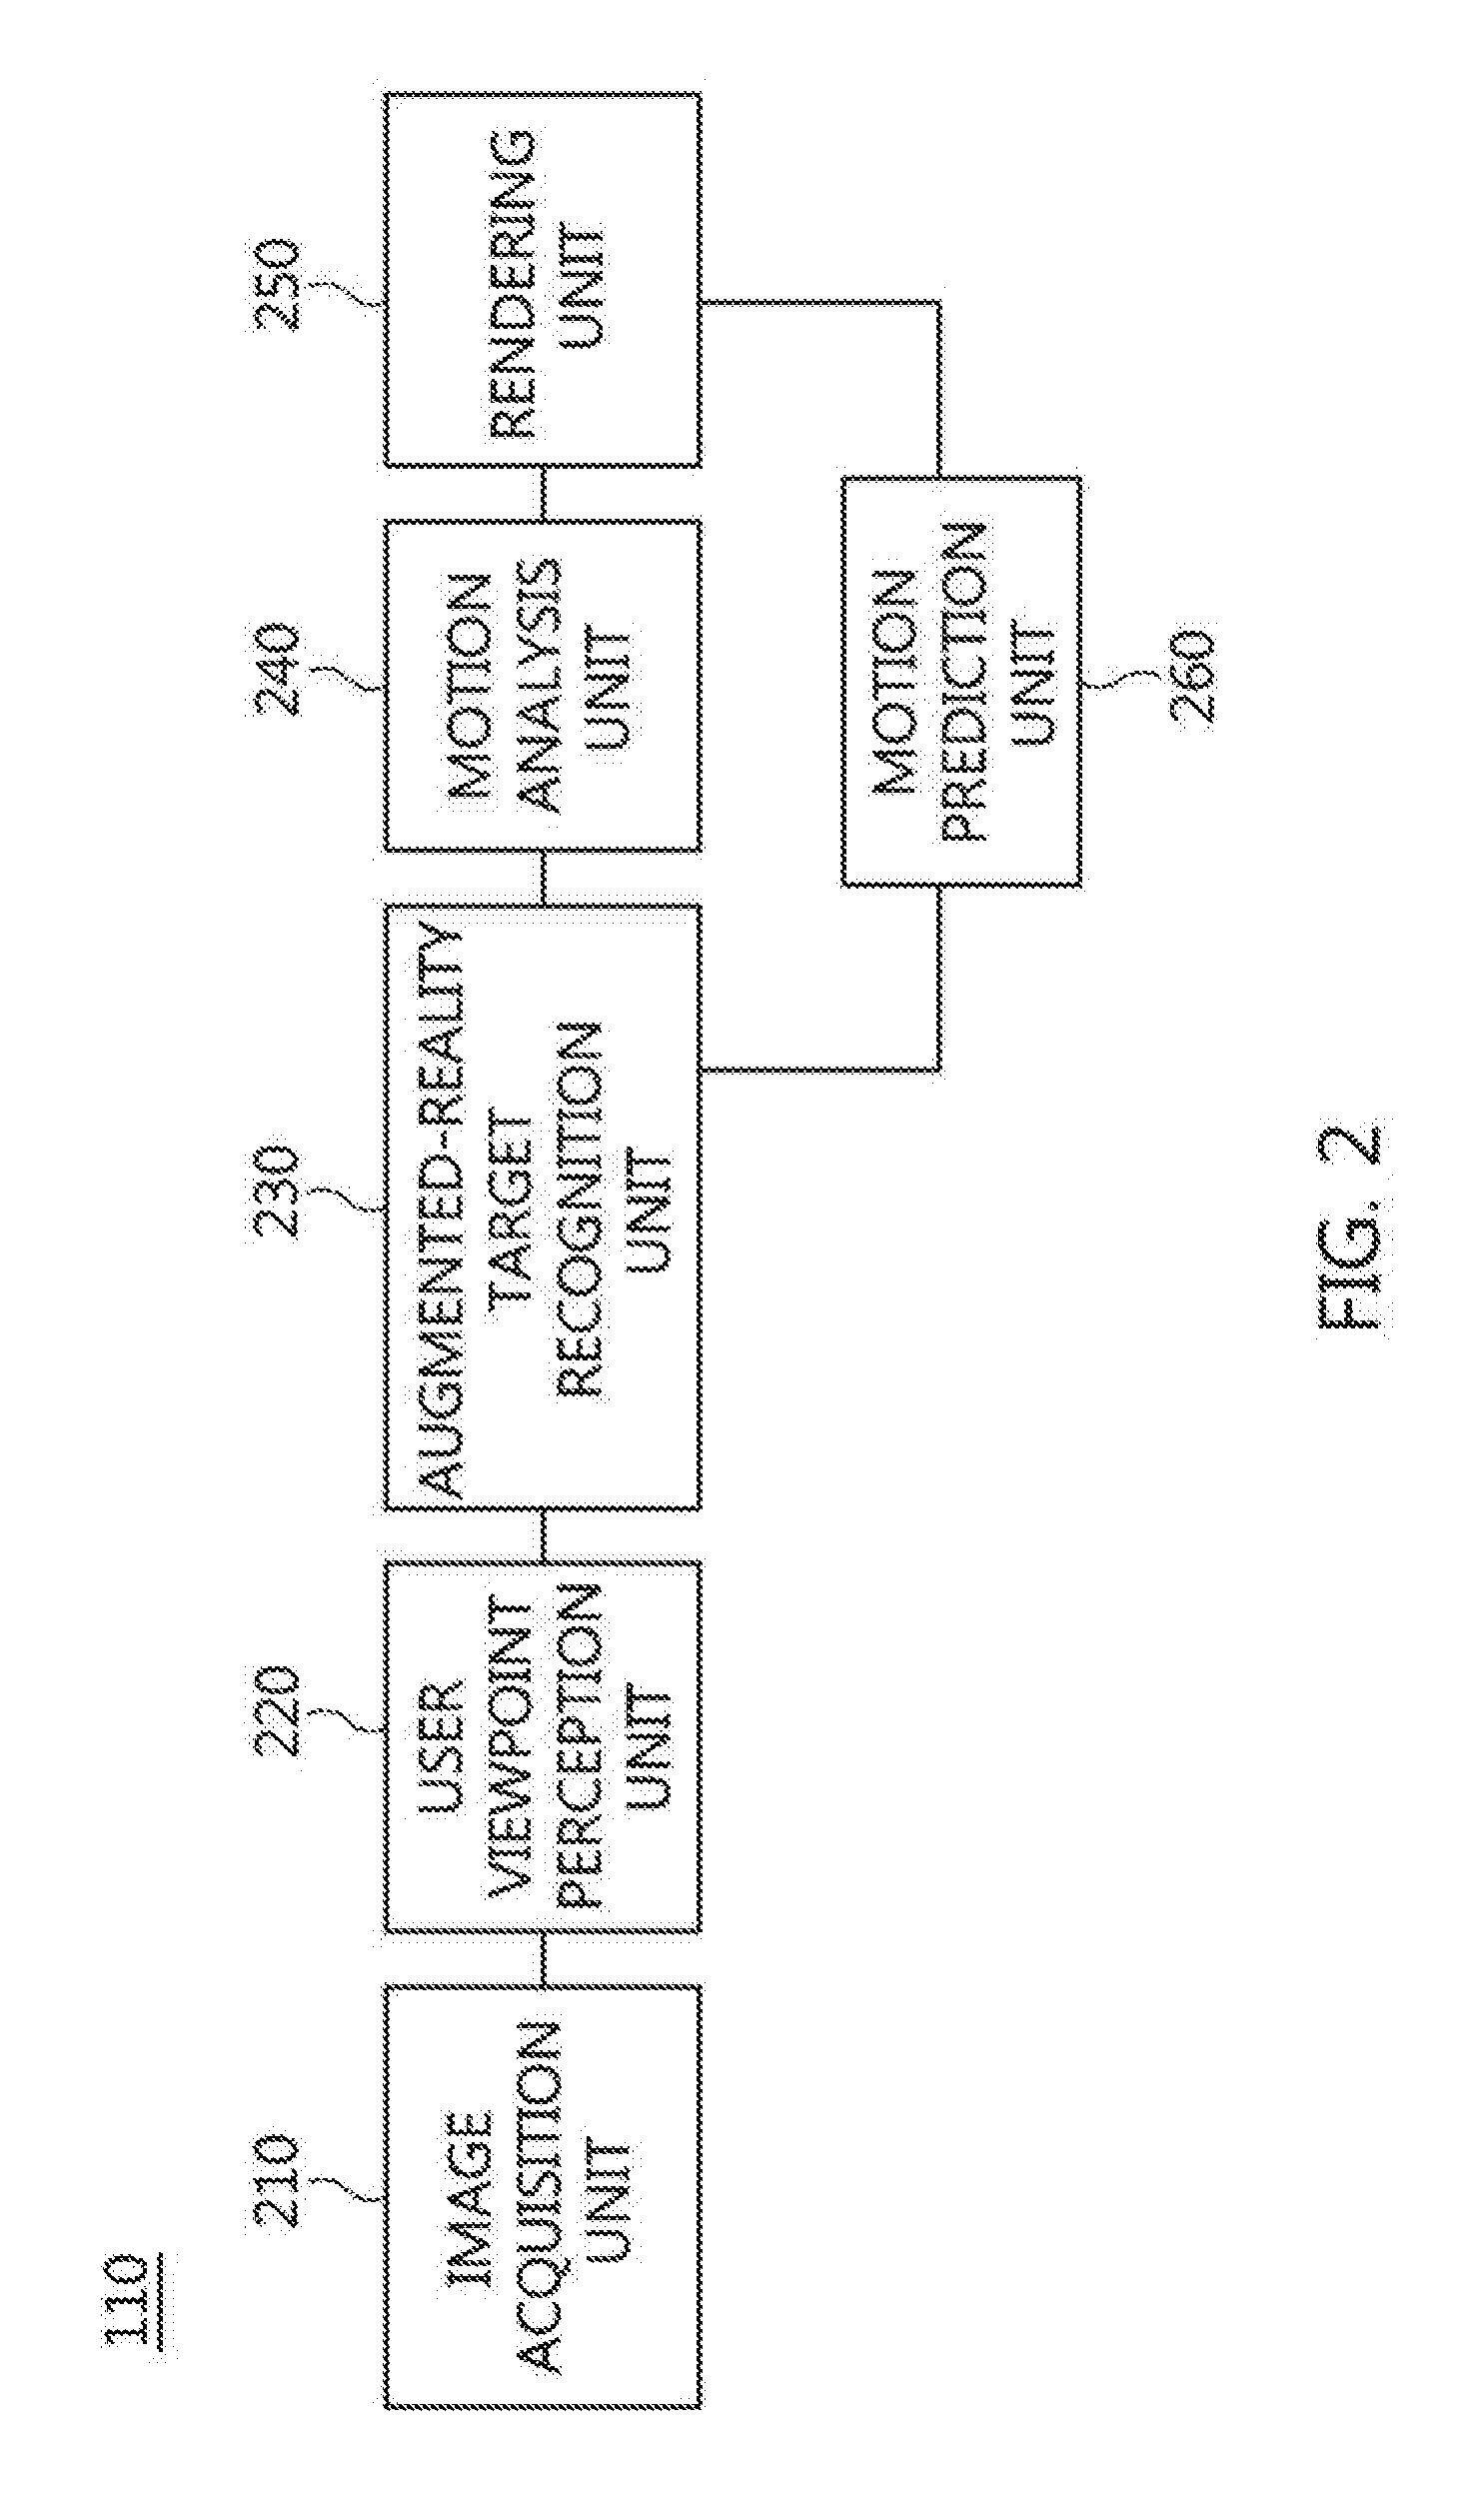 Method and apparatus for augmented-reality rendering on mirror display based on motion of augmented-reality target